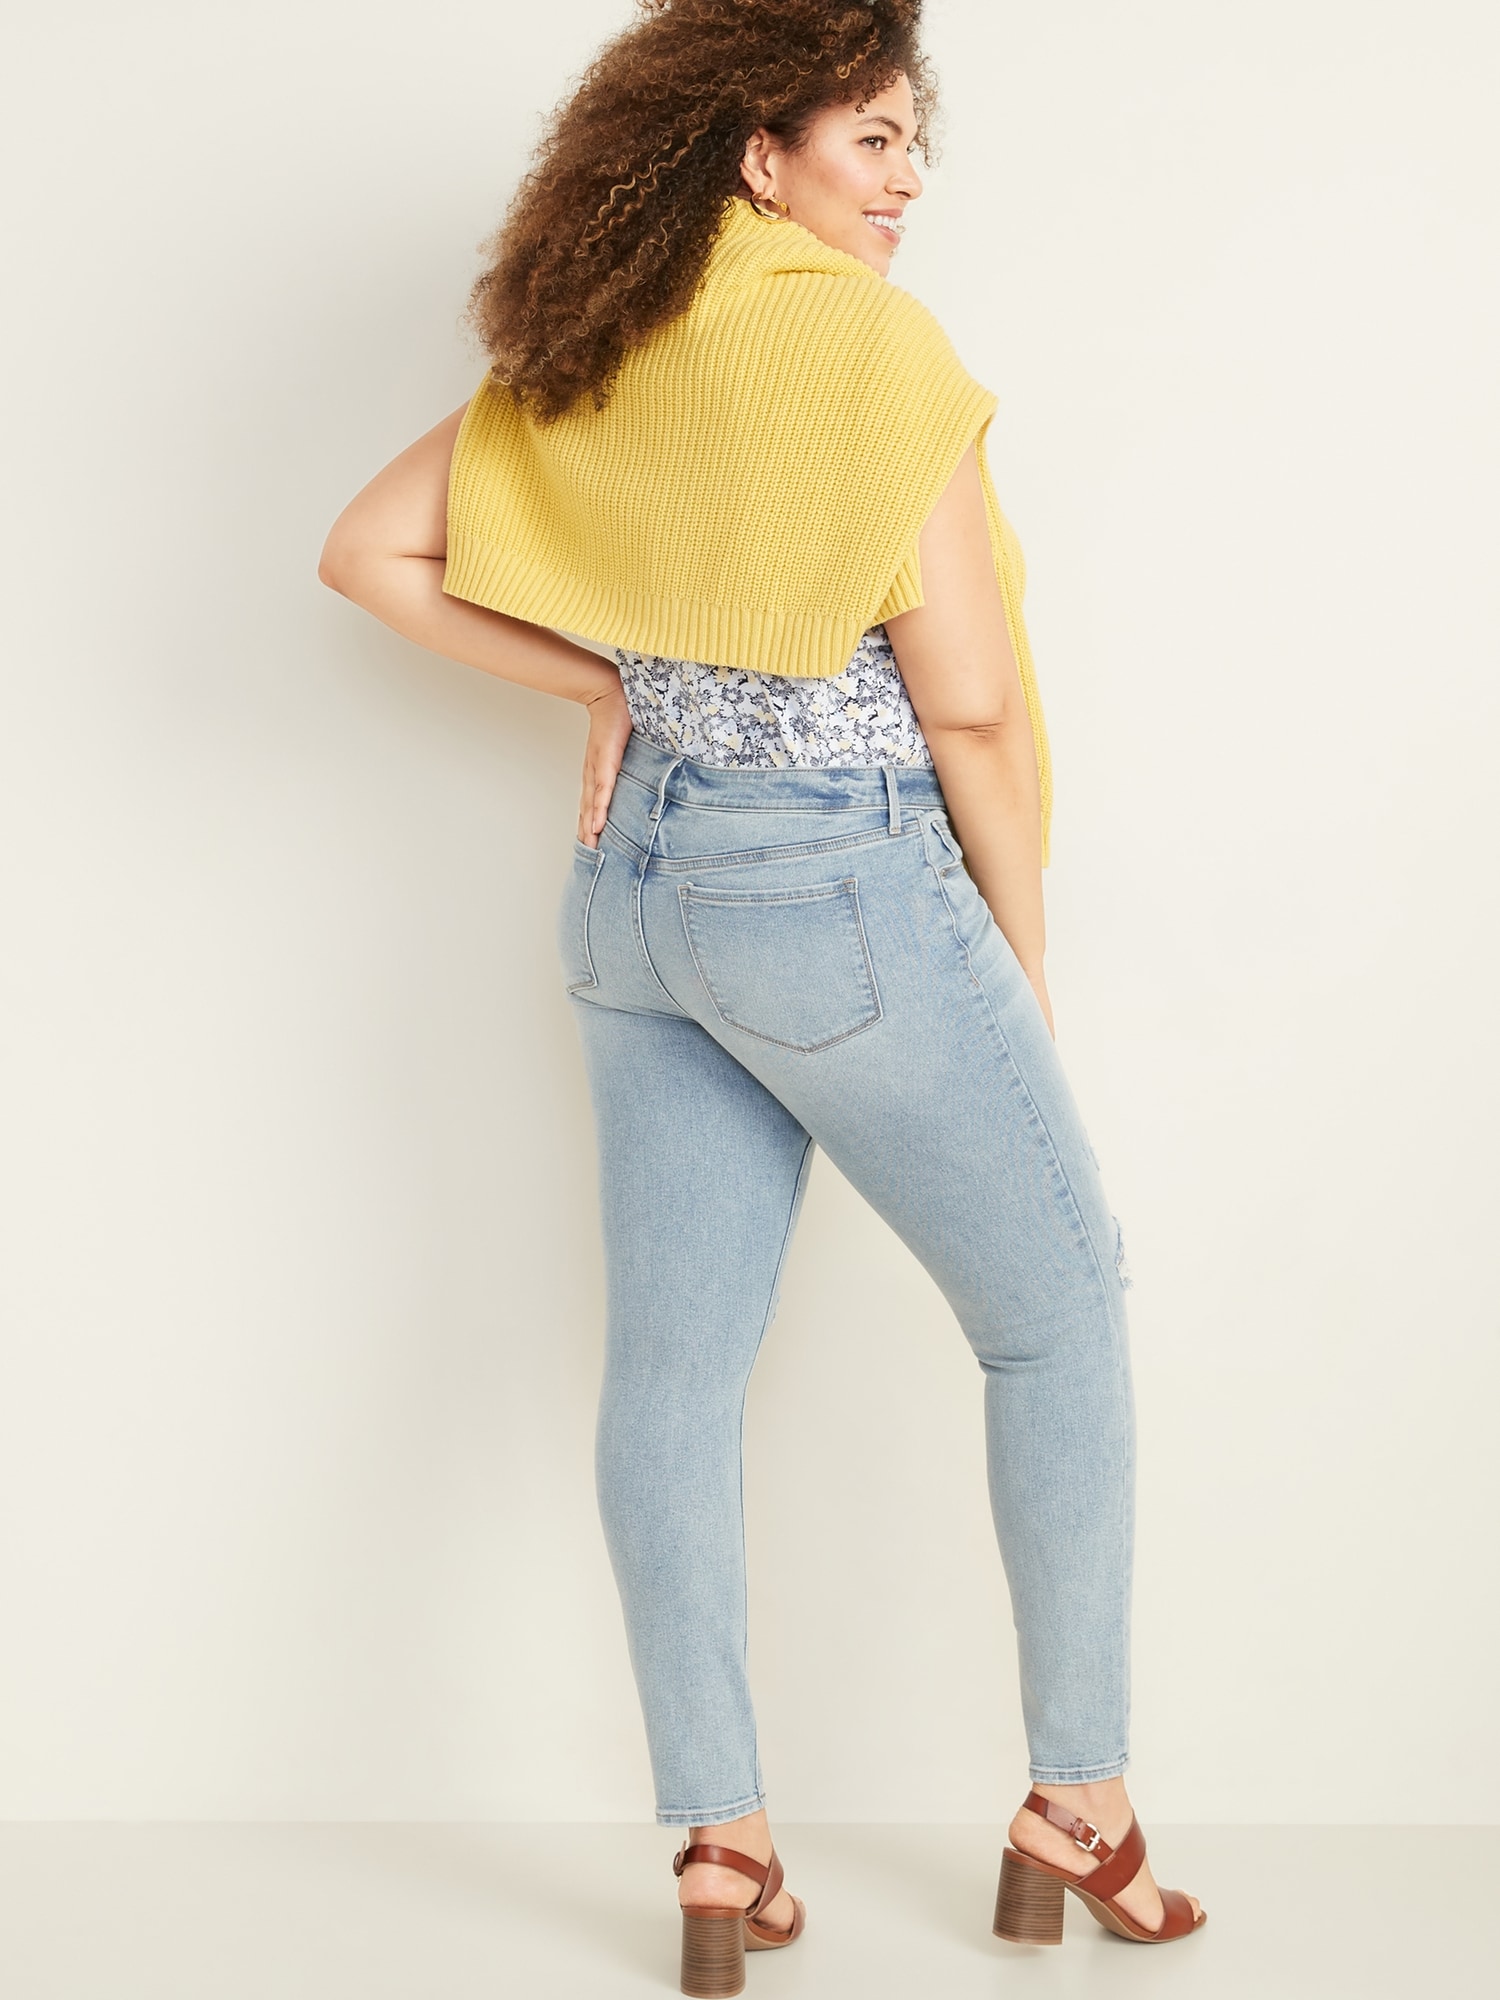 low rise button fly jeans